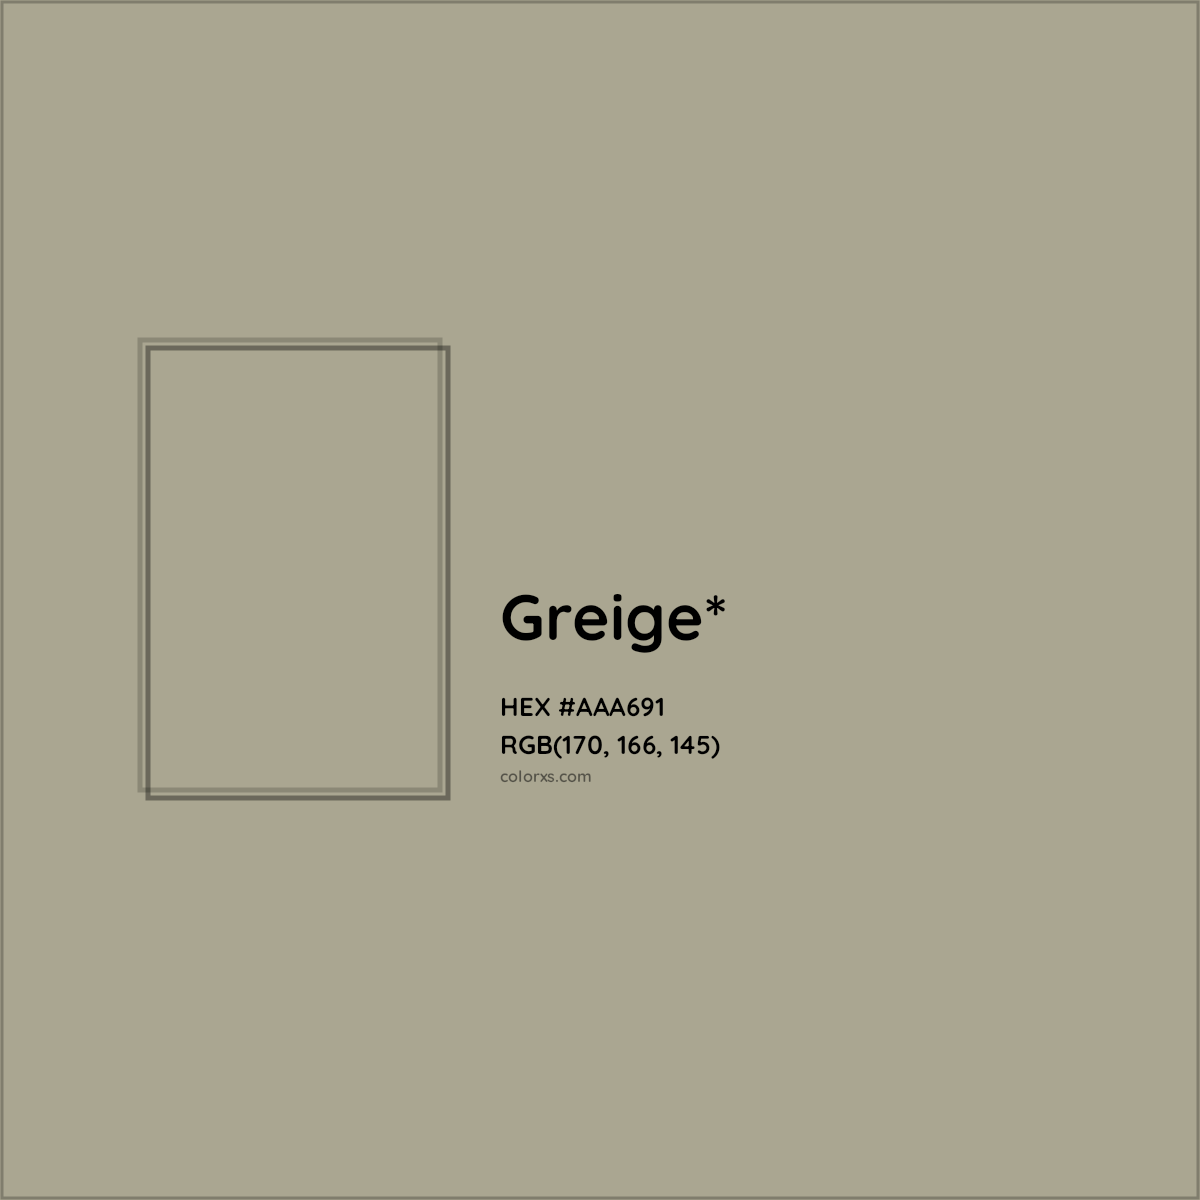 HEX #AAA691 Color Name, Color Code, Palettes, Similar Paints, Images